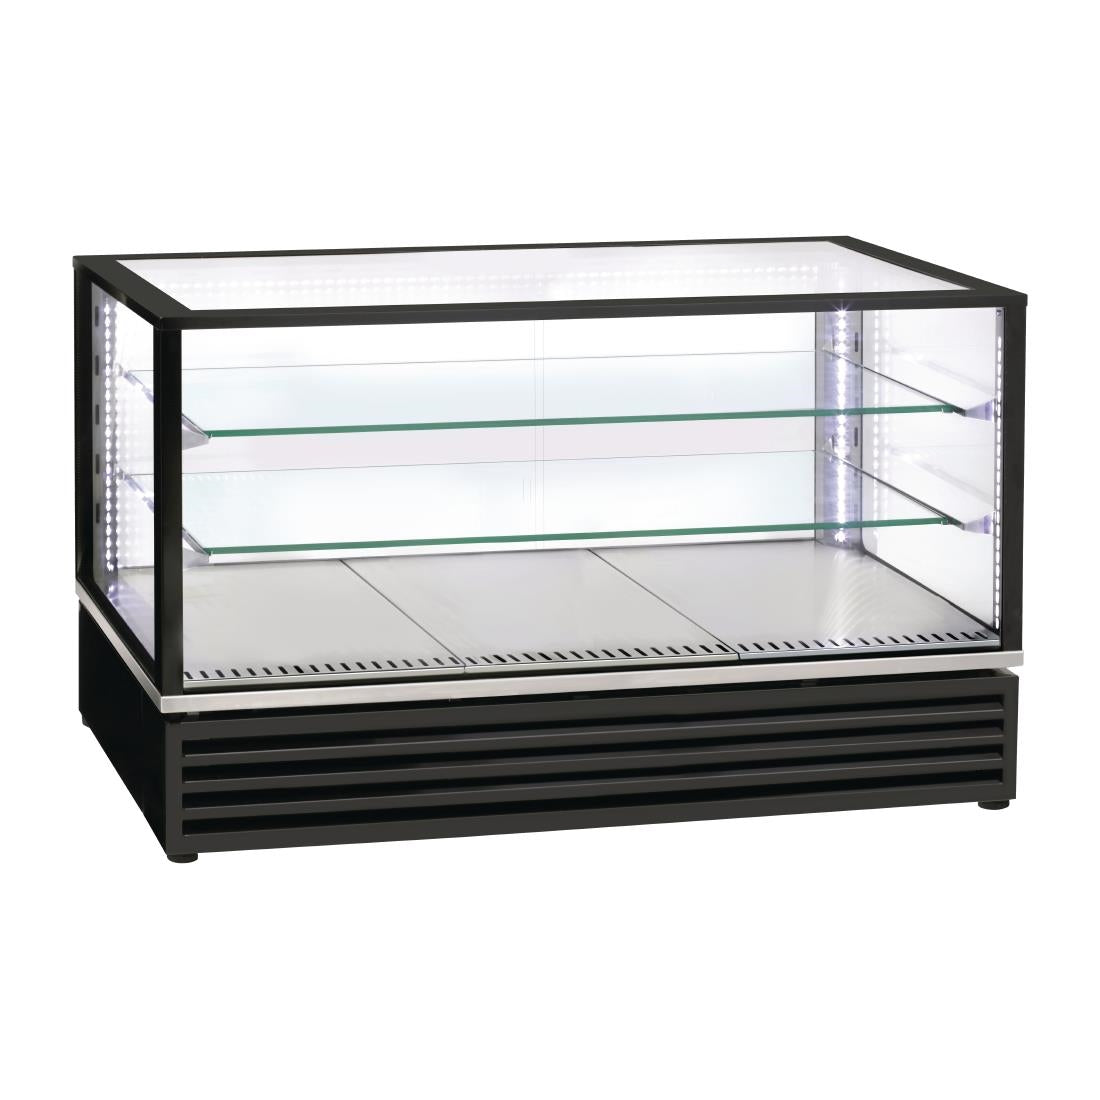 DH788 Roller Grill Countertop Chocolate Display Fridge Black 1200mm CDC1200 N JD Catering Equipment Solutions Ltd